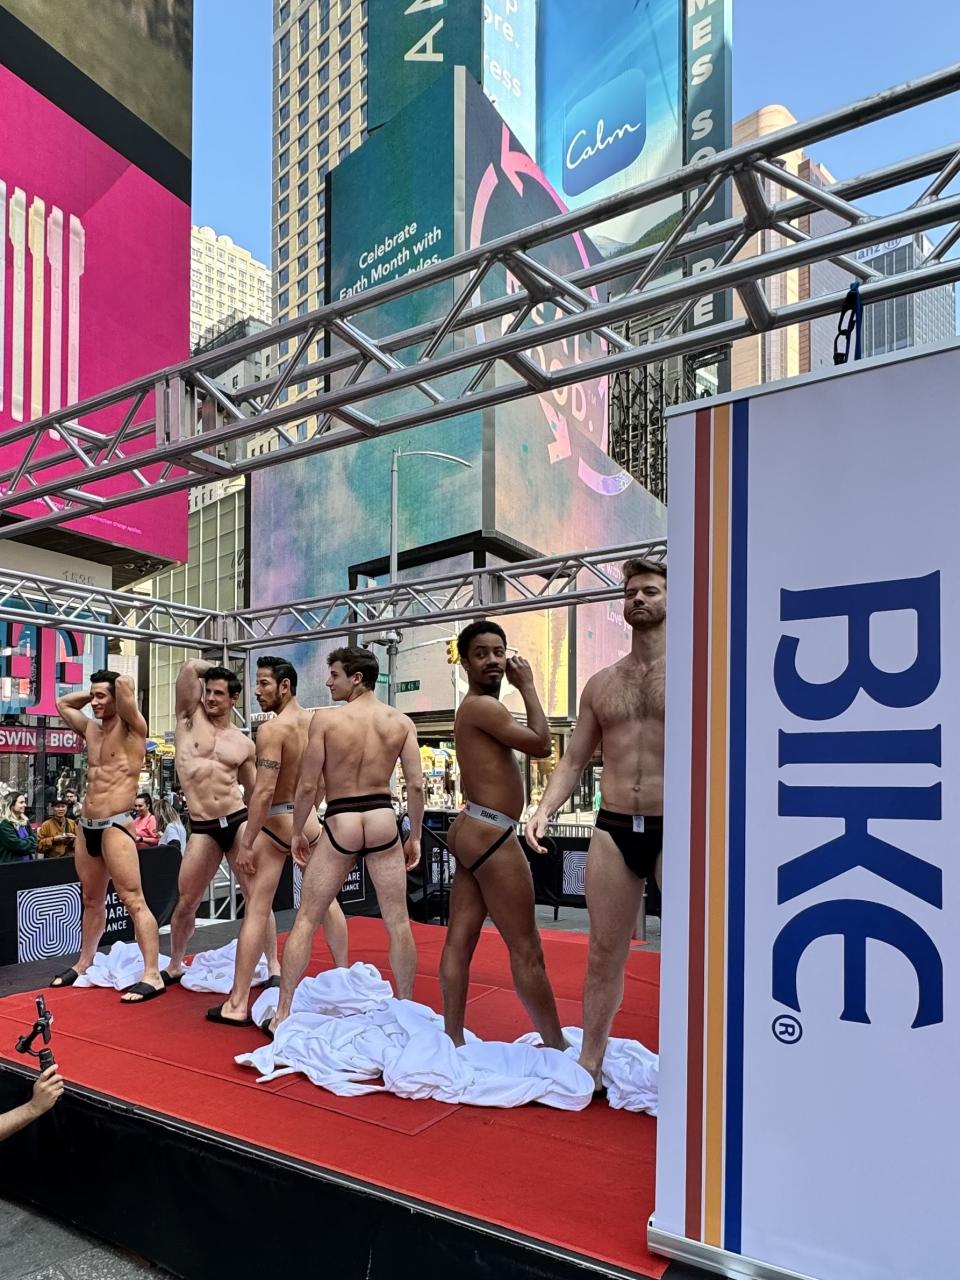 Broadway Bares for Bike in Times Square.